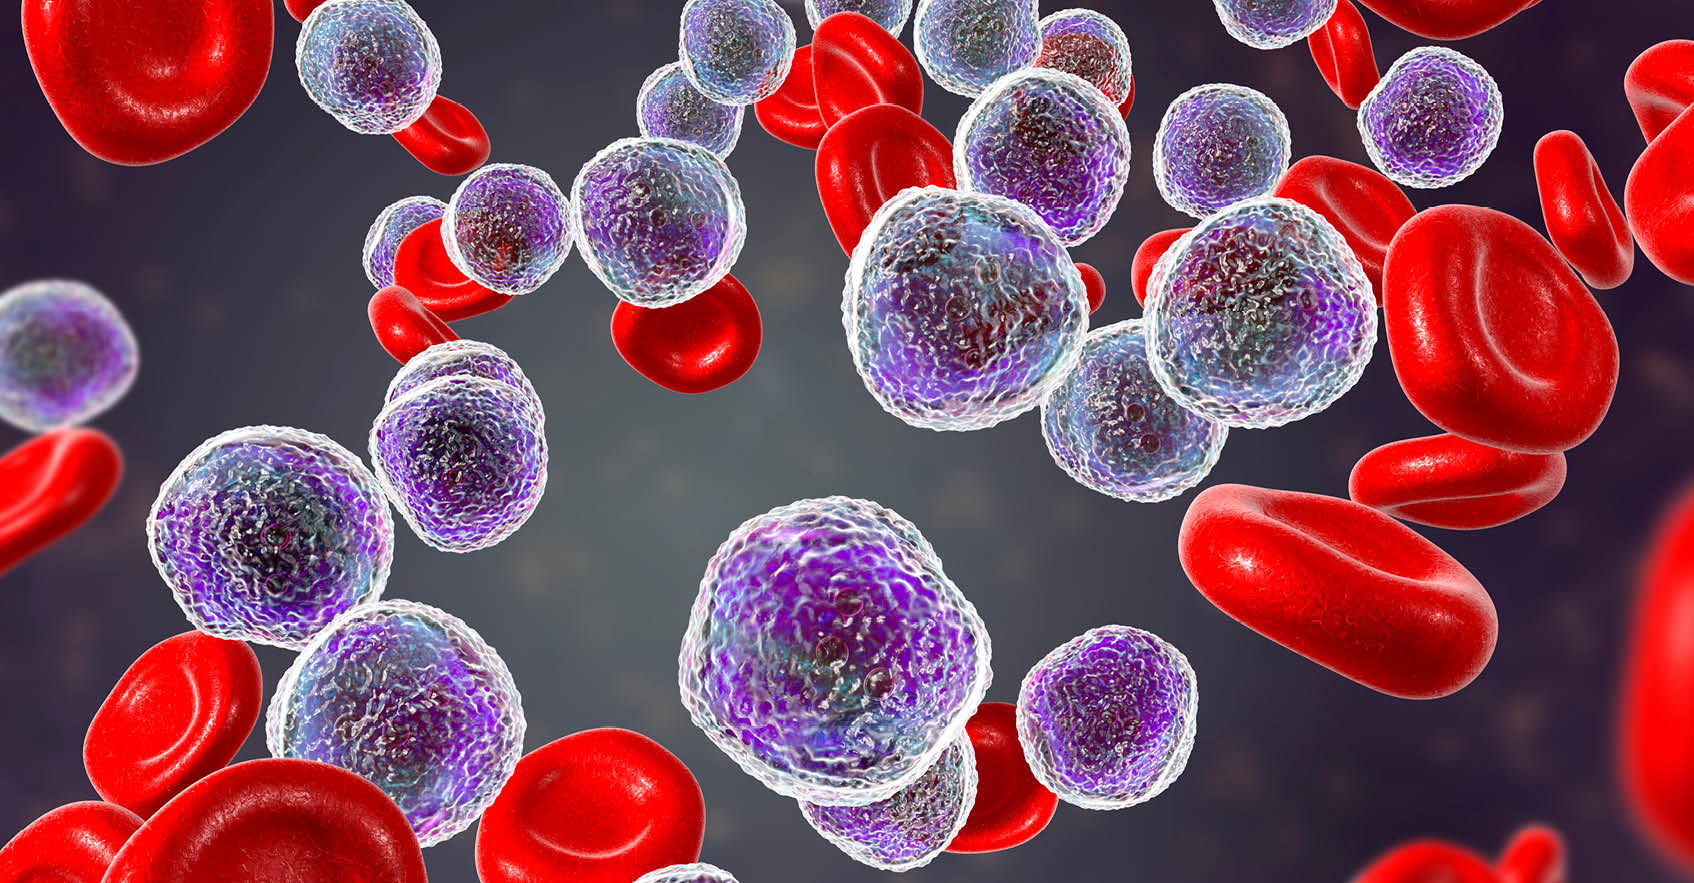 Microscopic view of Myelodysplastic Syndrome (MDS) cells with varied shapes surrounding healthy red blood cells (RBCs) that are circulating in a blood vessel.